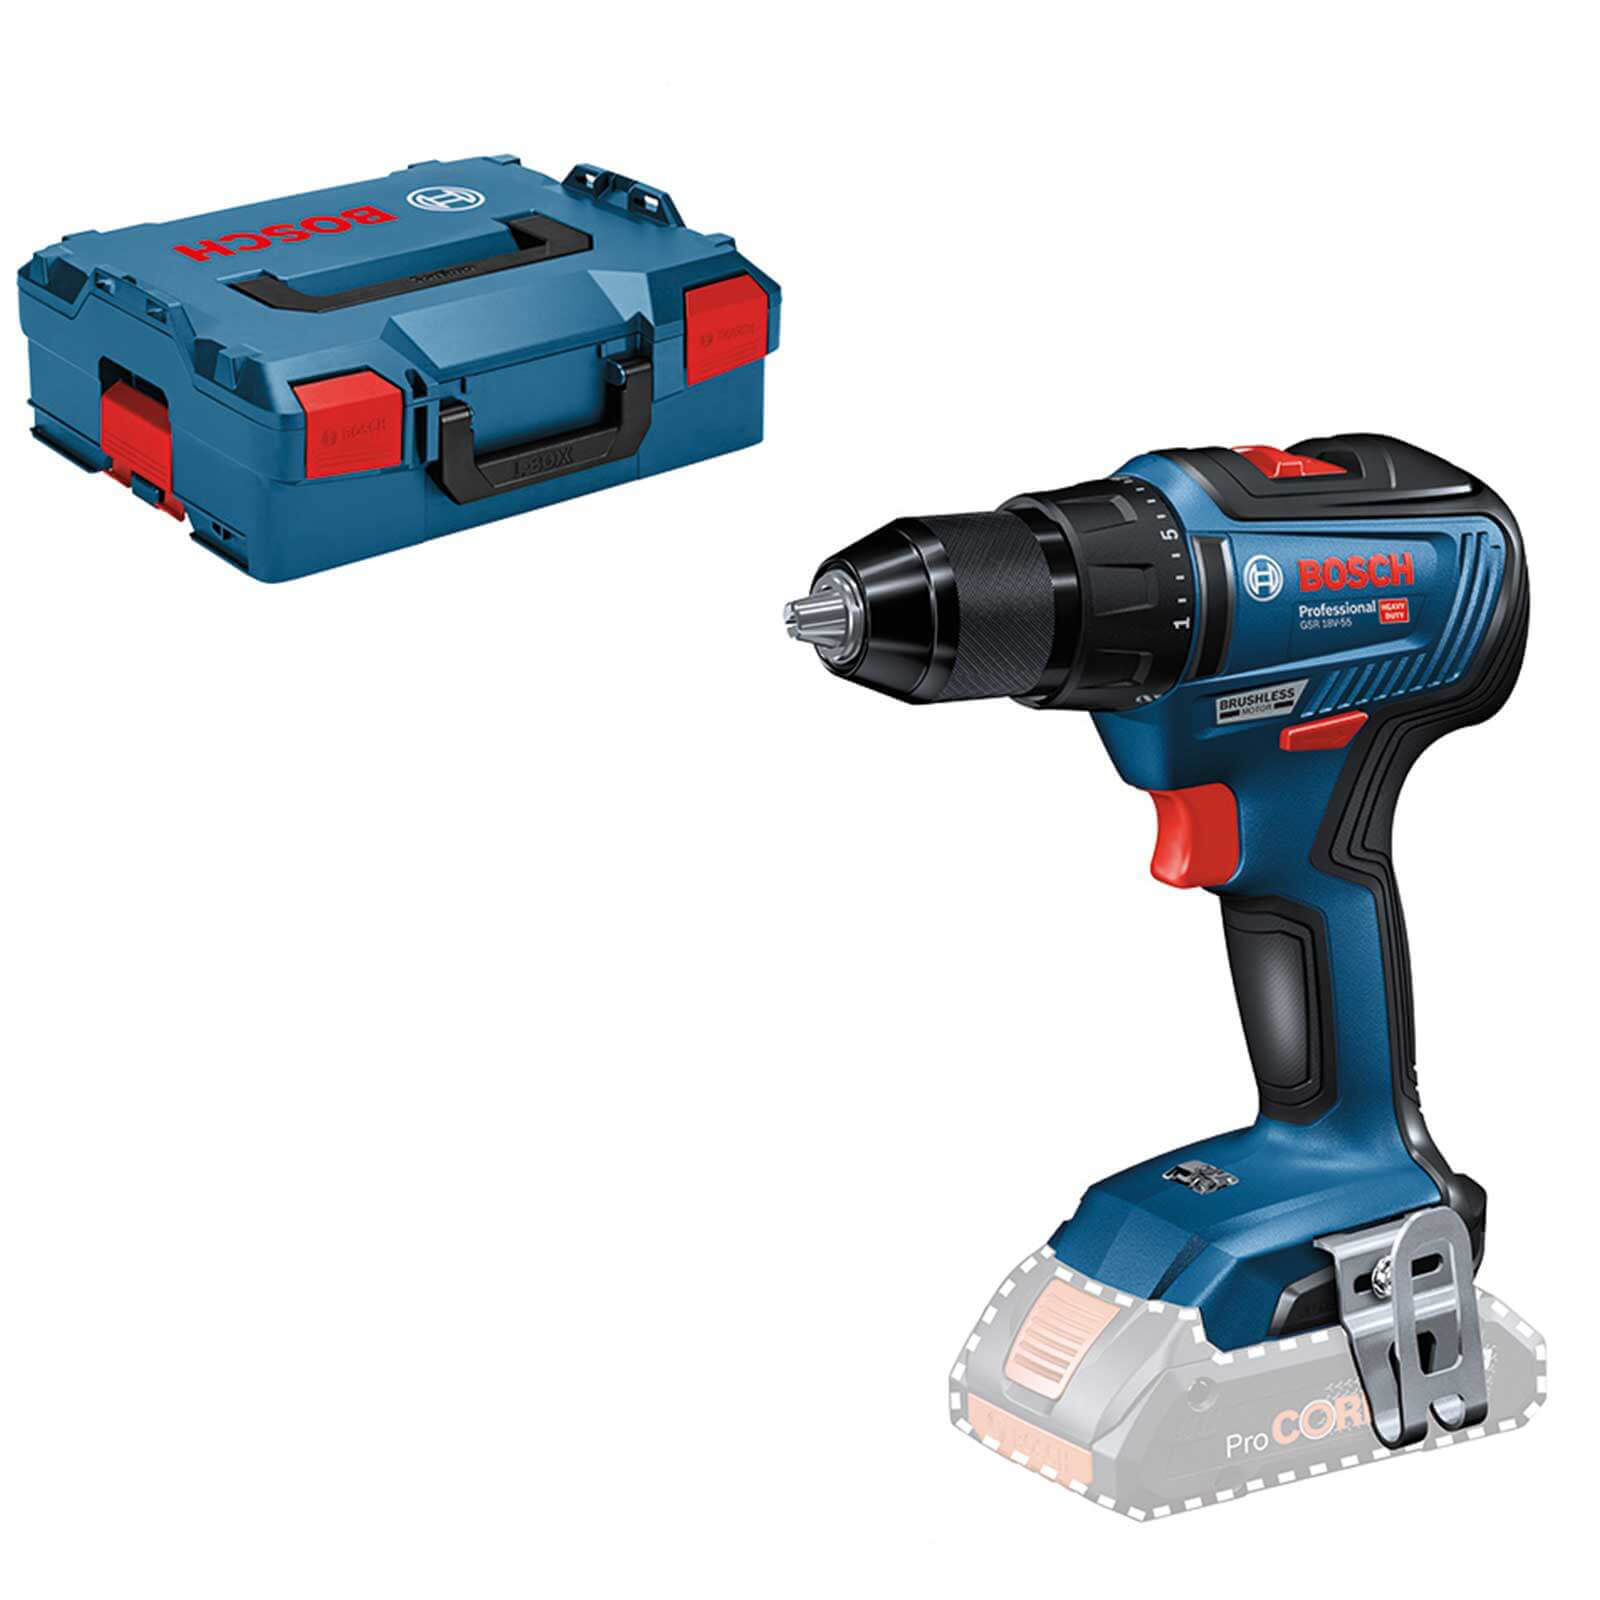 Image of Bosch GSR 18V-55 18v Cordless Brushless Drill Driver No Batteries No Charger Case